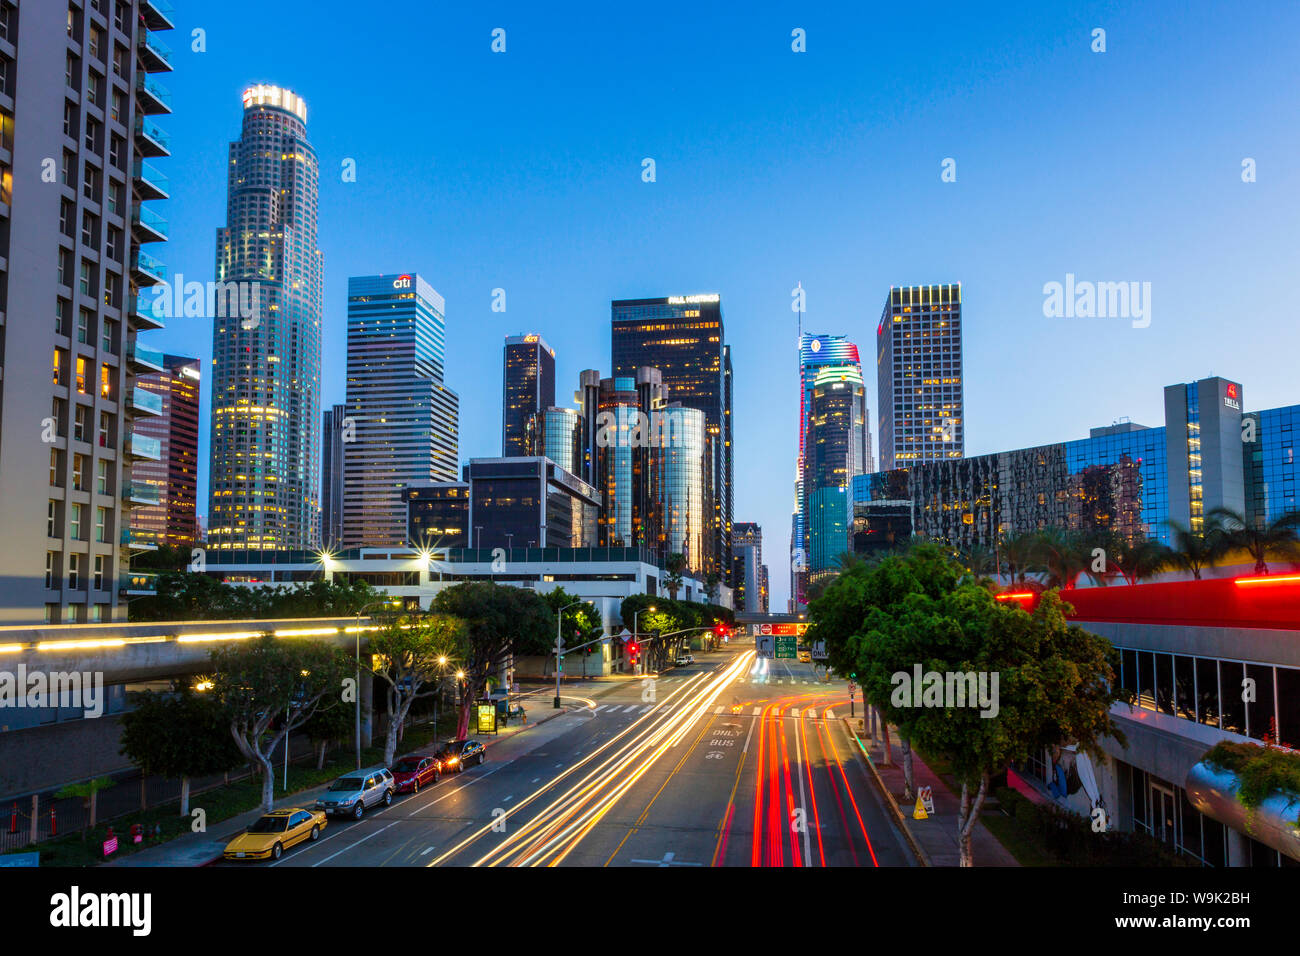 Downtown financial district of Los Angeles city at night, Los Angeles, California, United States of America, North America Stock Photo